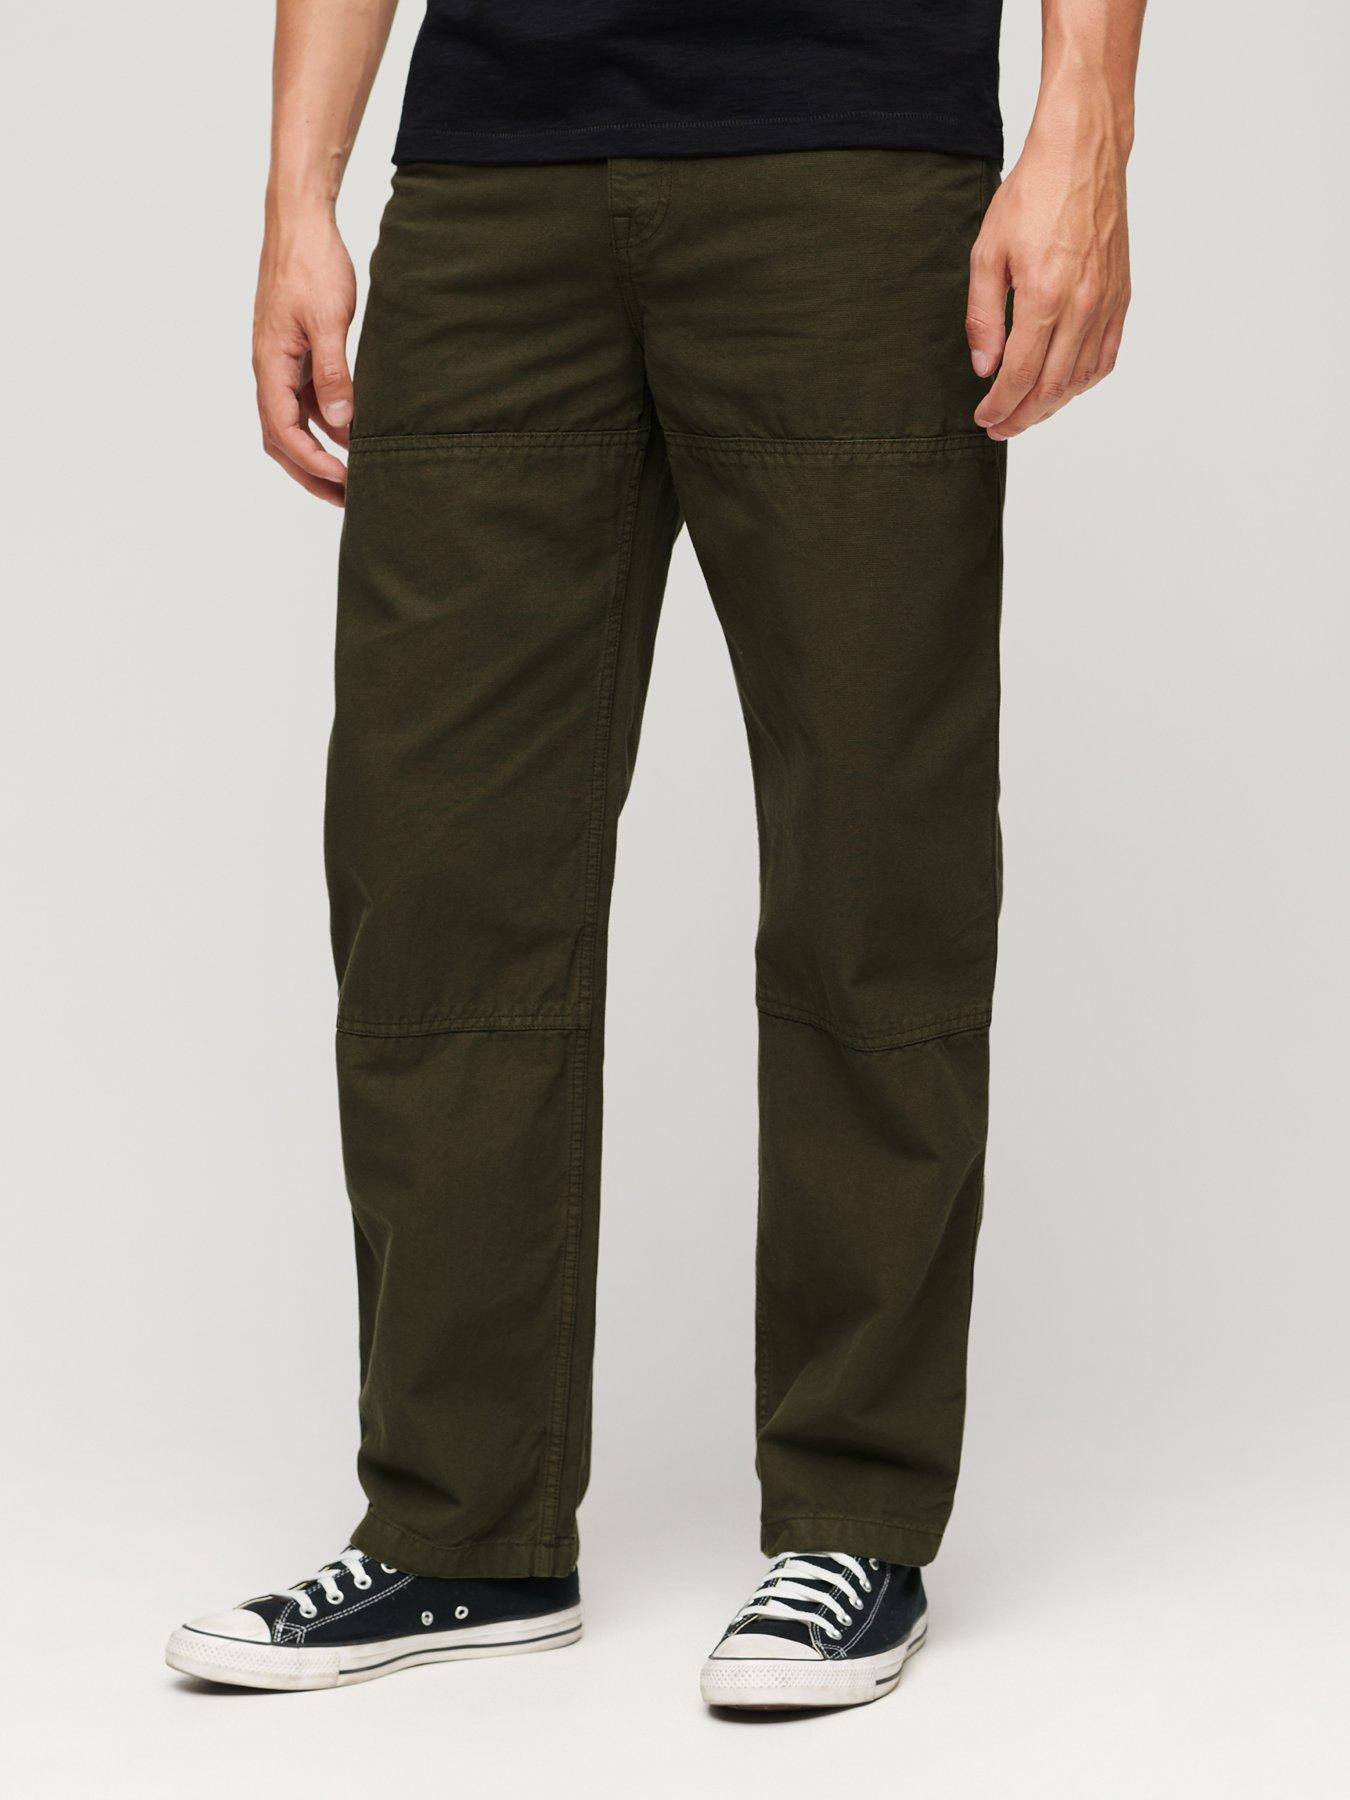 Dickies Men's 12-Oz. Duck Relaxed Fit Carpenter Pants - Timber, 30in. x  30in., Model# 1939RTB | Northern Tool